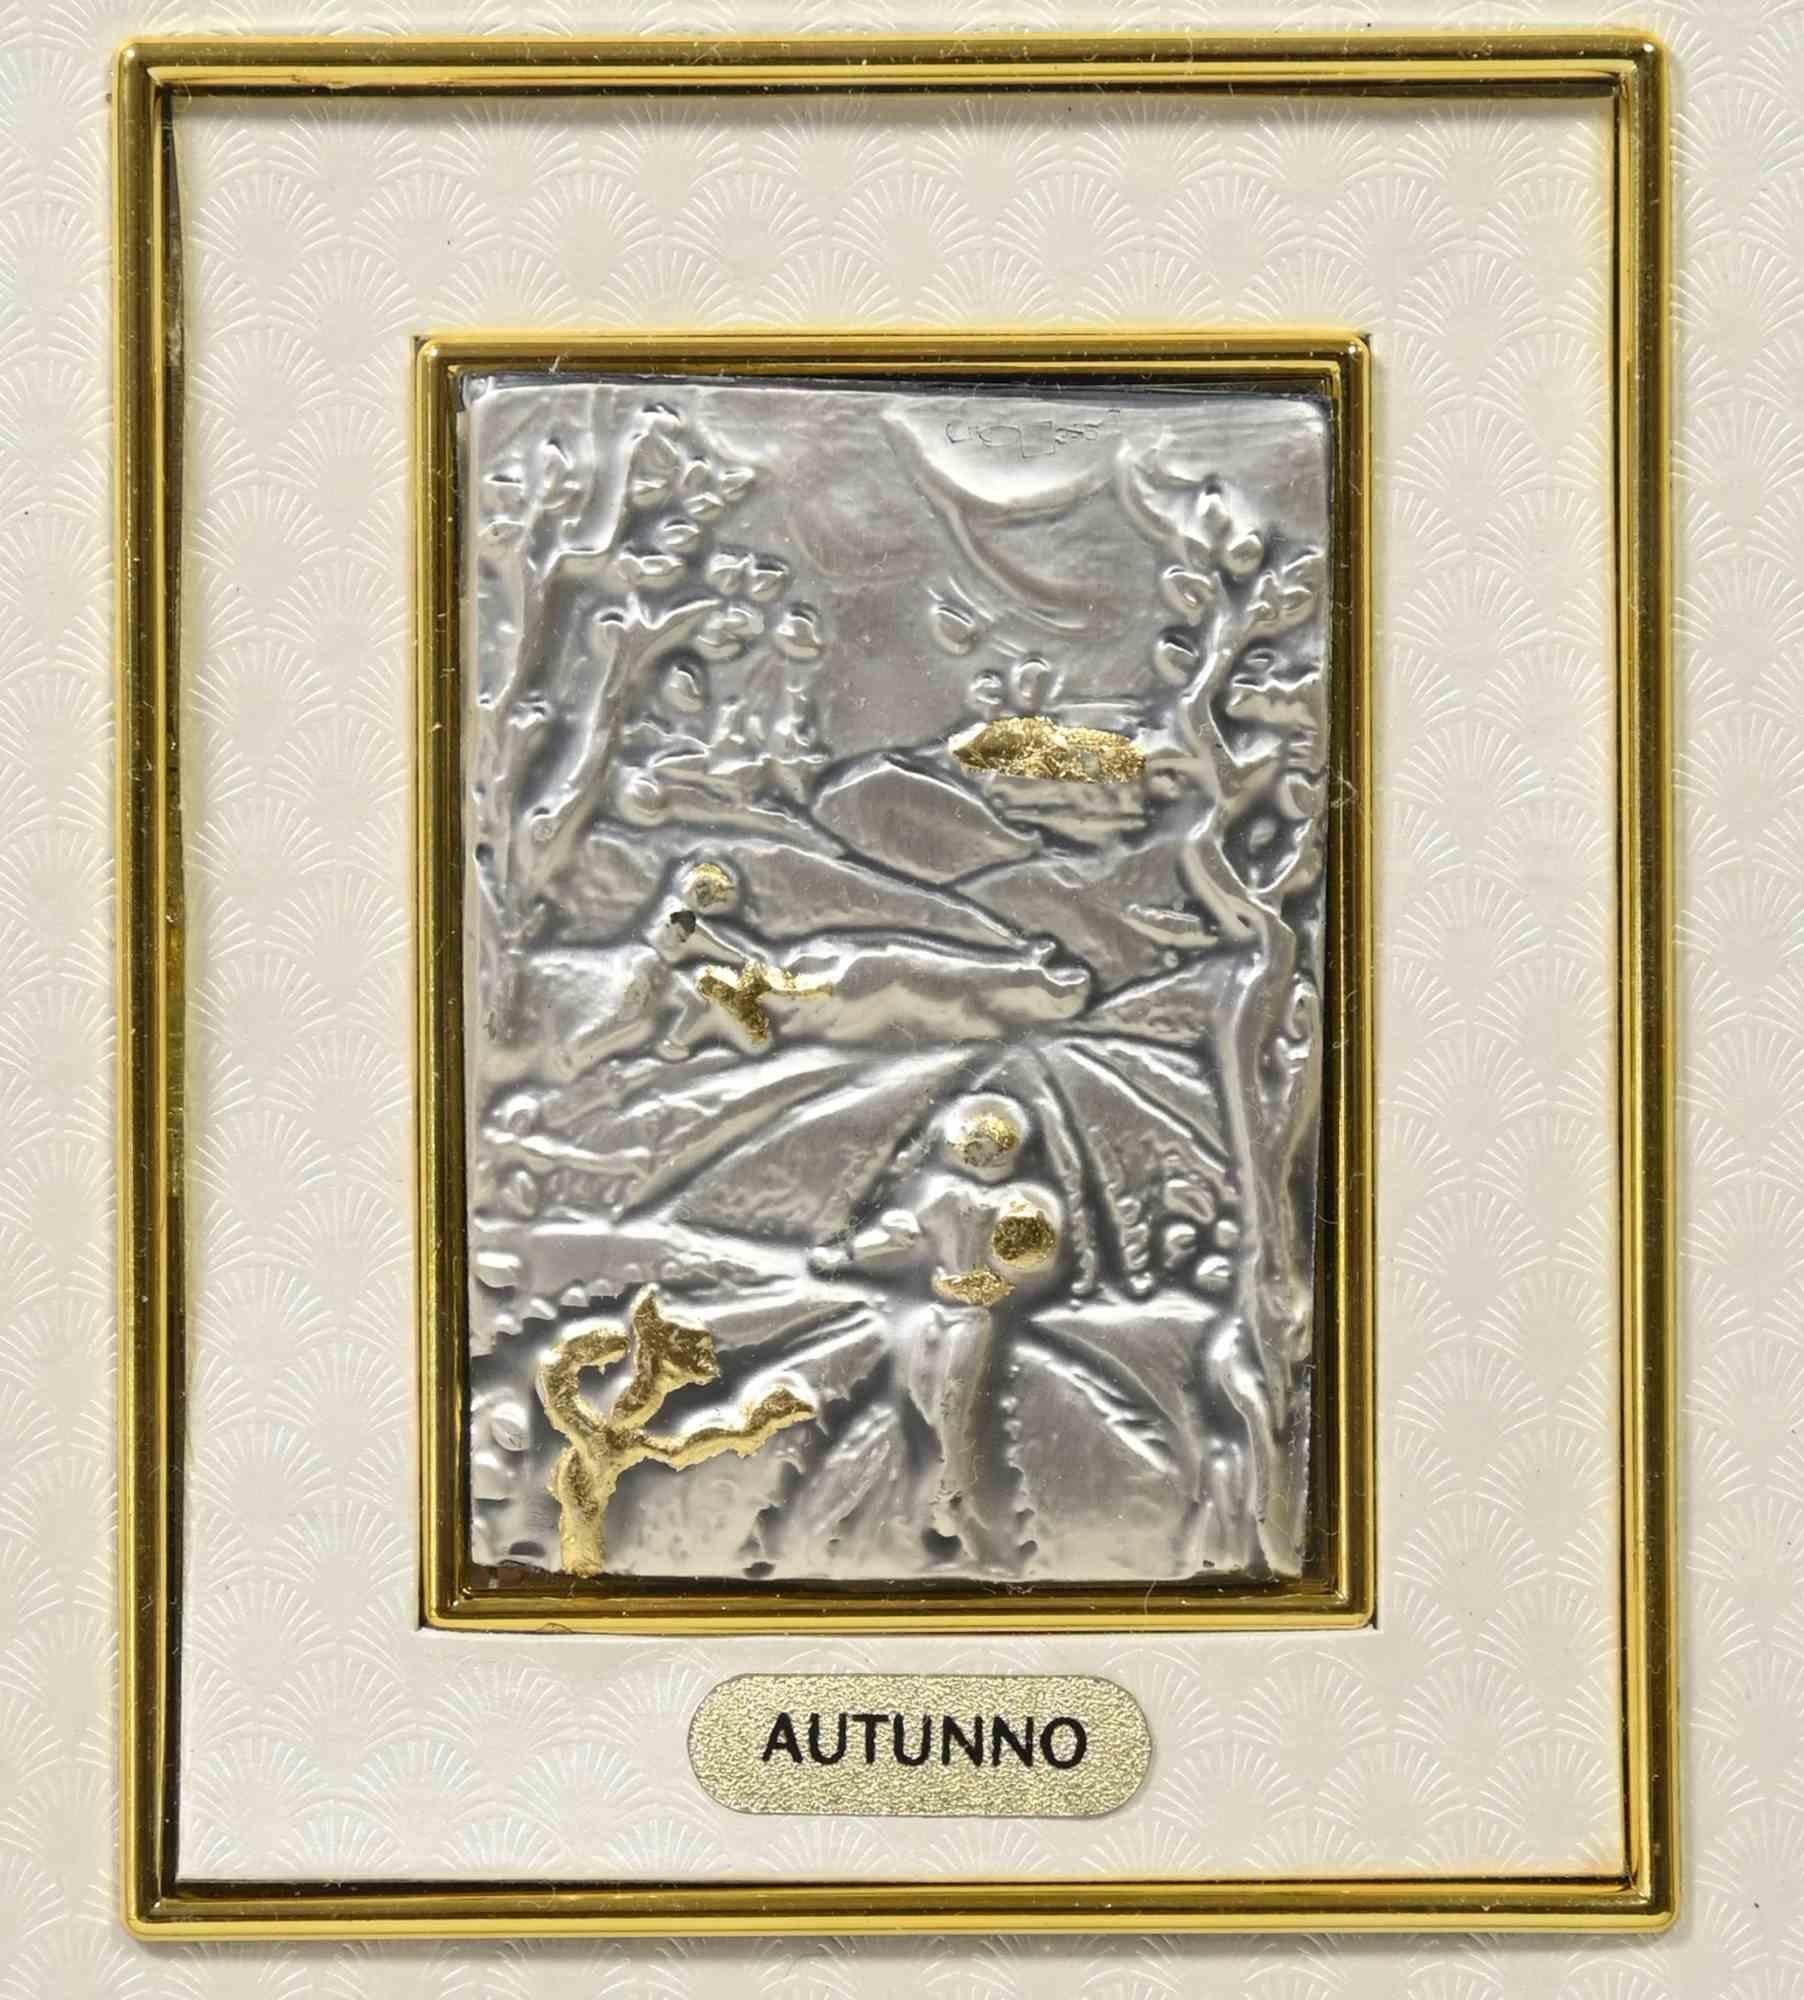 Autumn is an original modern artwork realized in the 1970s.

Realized by Euroesse (label on the back)

The artwork is realized on silver plate and gold leaf.

Includes frame.